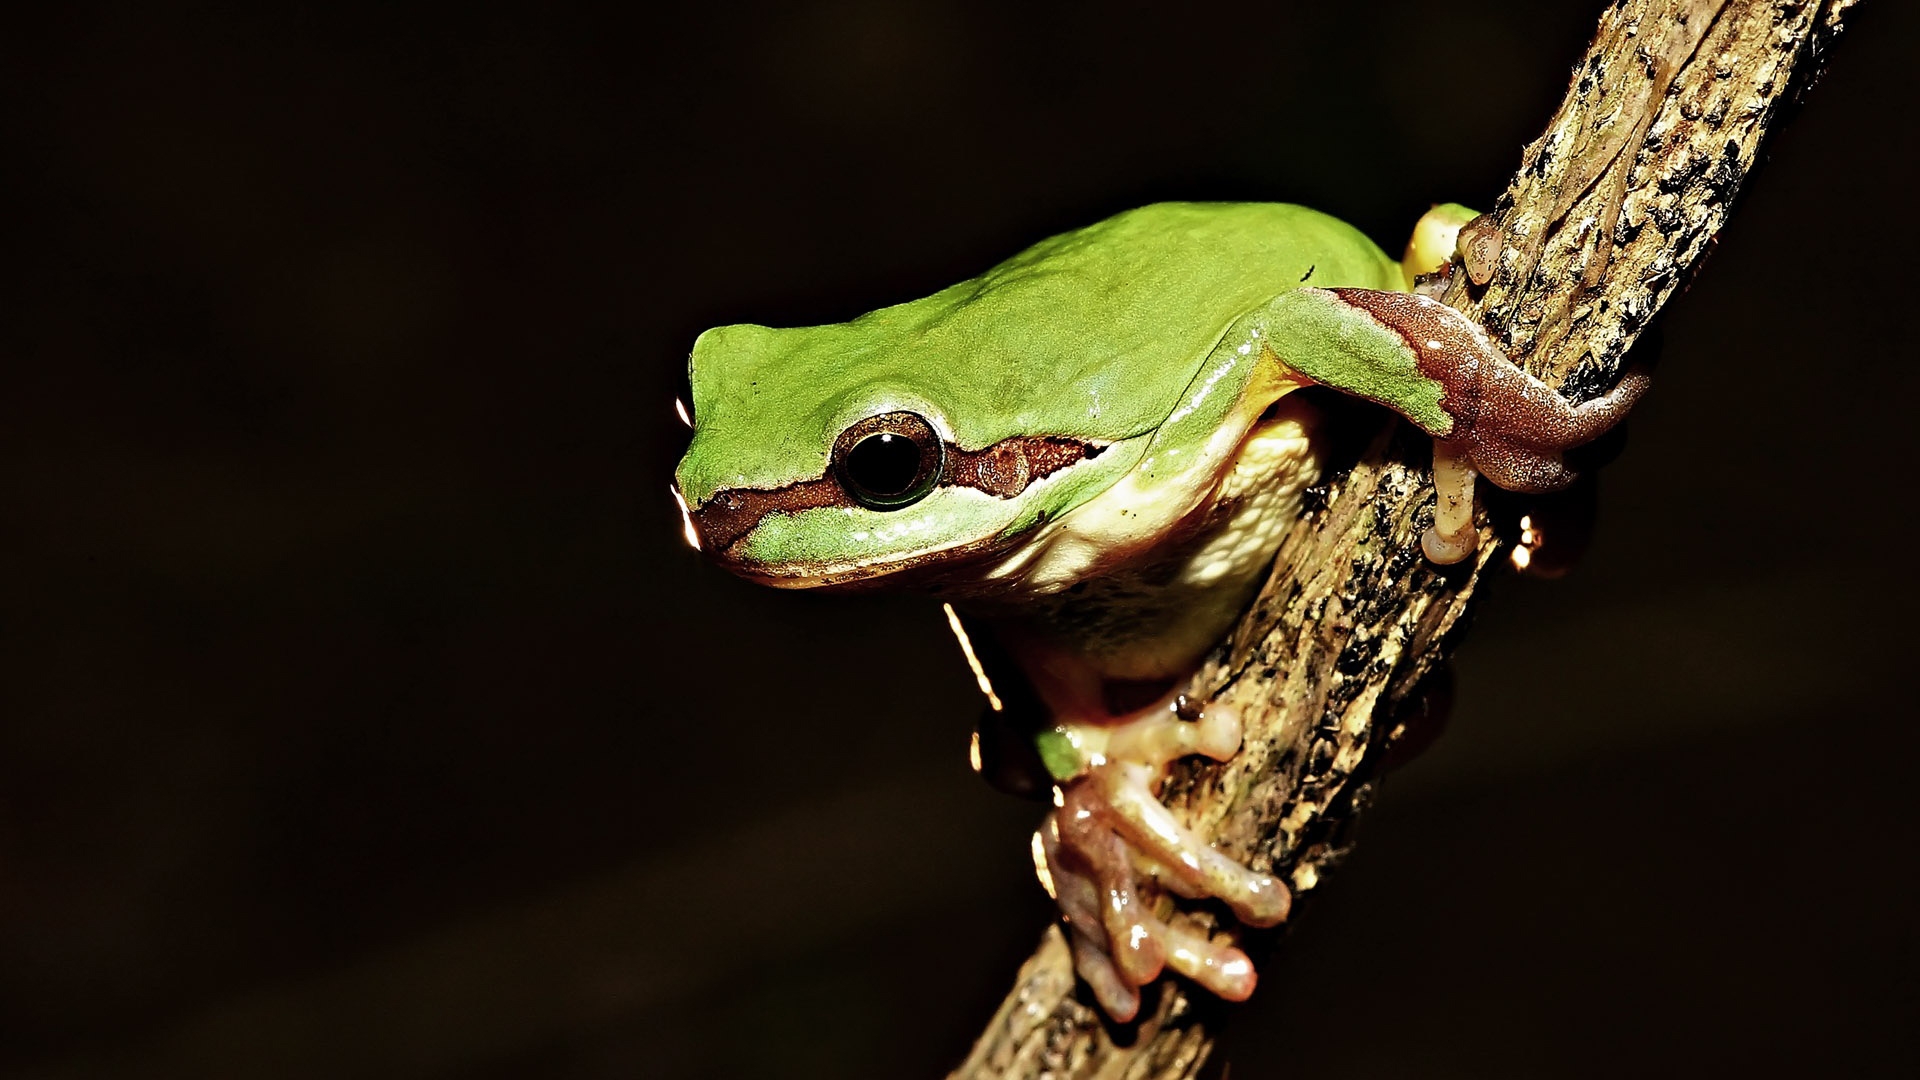 Frog on tree   High Definition Wallpapers   HD wallpapers 1920x1080